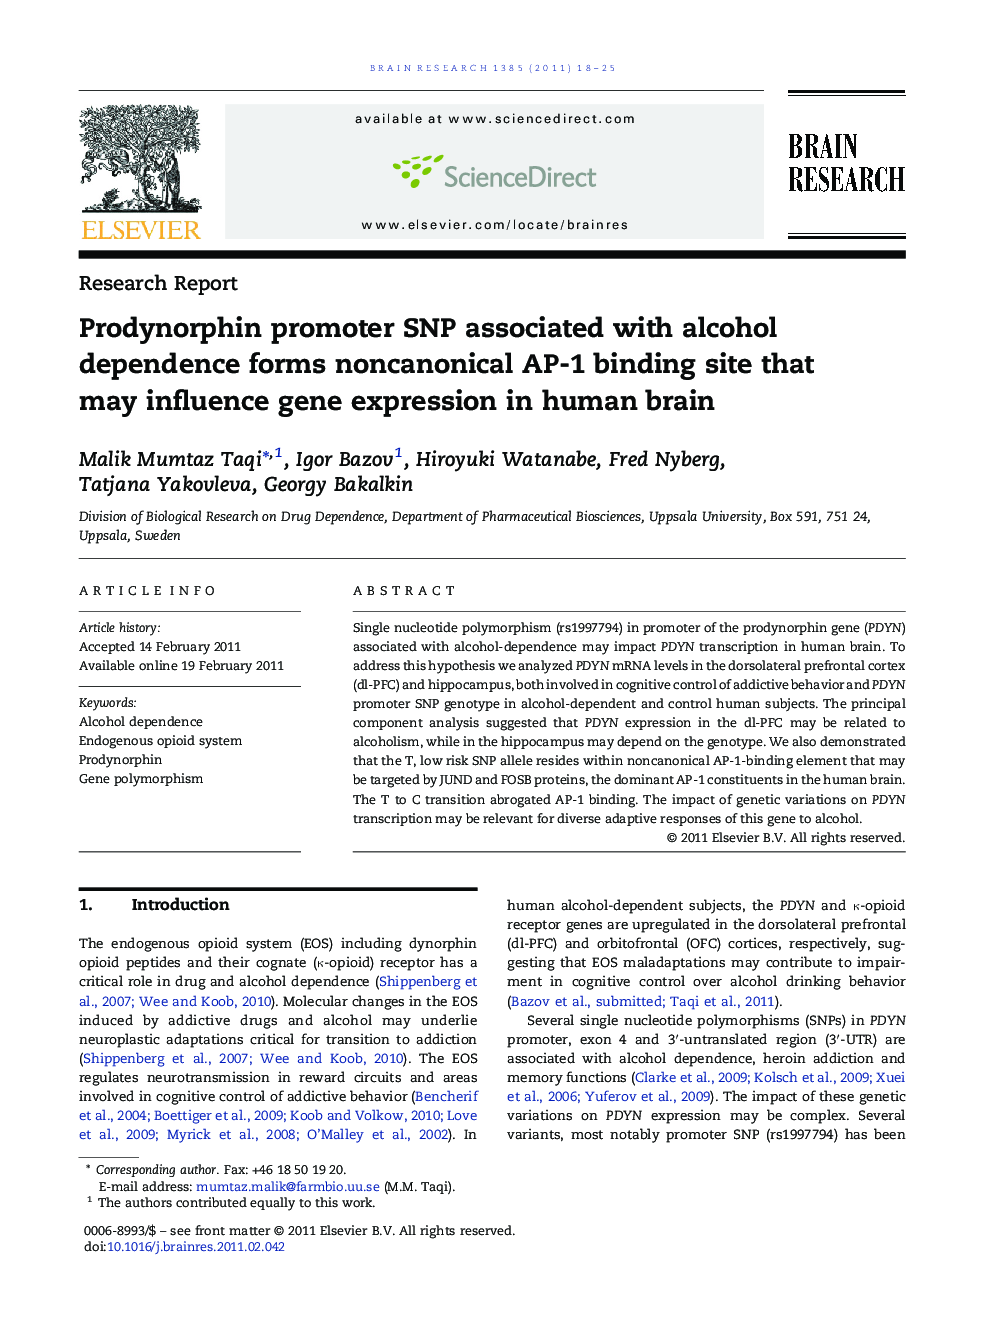 Research ReportProdynorphin promoter SNP associated with alcohol dependence forms noncanonical AP-1 binding site that may influence gene expression in human brain